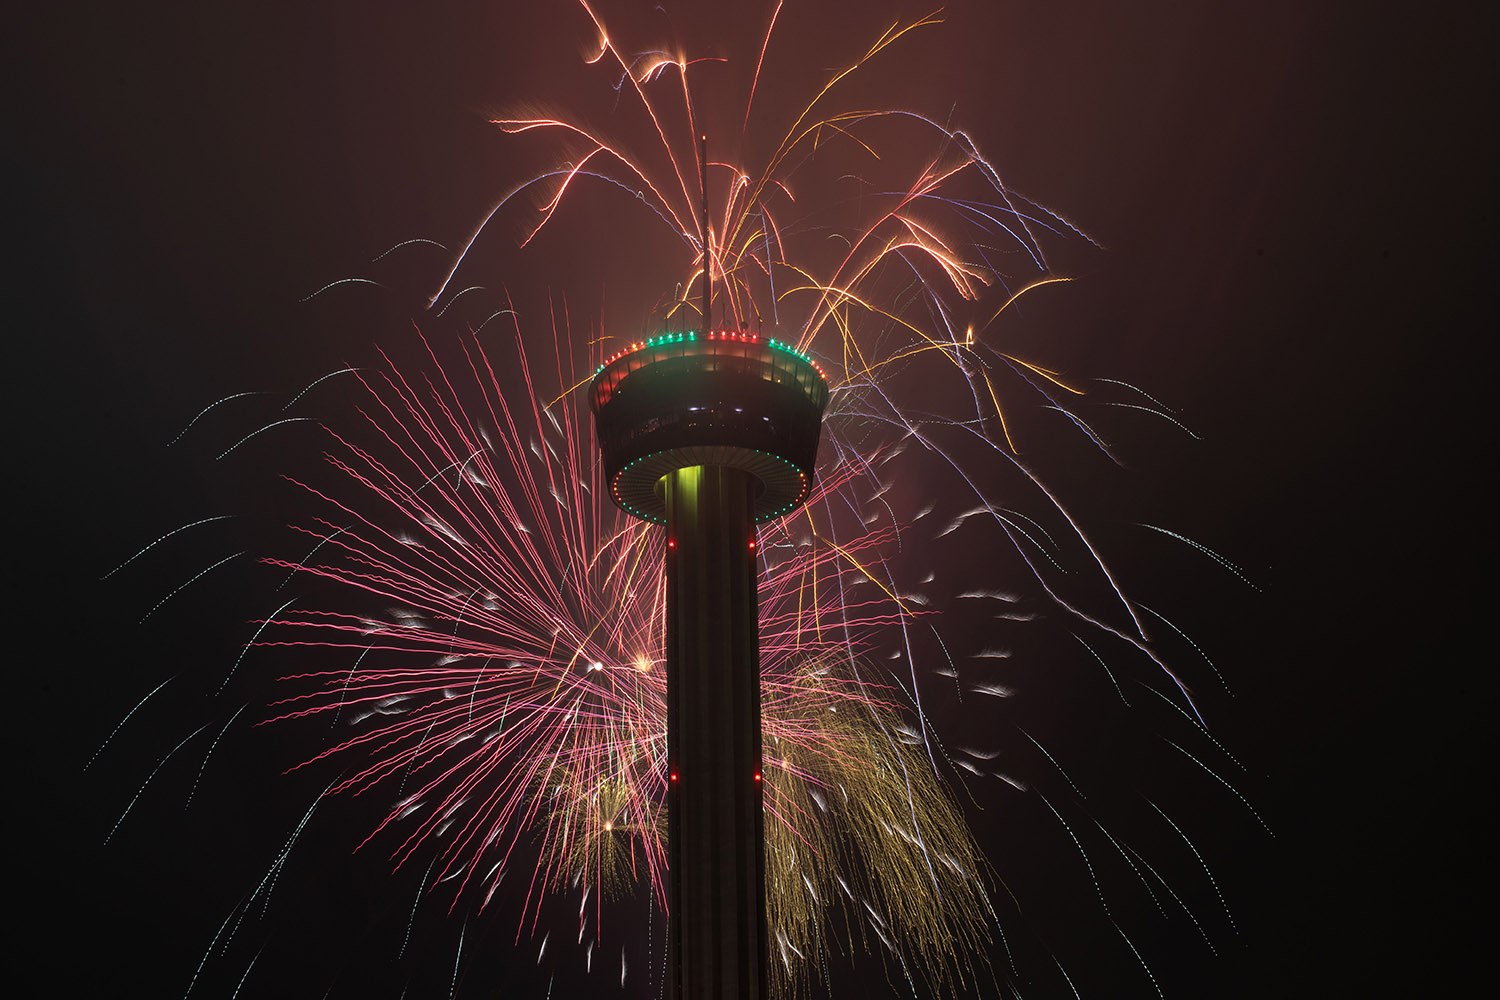 Dozens of fireworks exploded around the Tower of the America’s to ring in 2022 in San Antonio,Texas, on Jan. 1, 2022. (Kaylee Greenlee / San Antonio Heron)